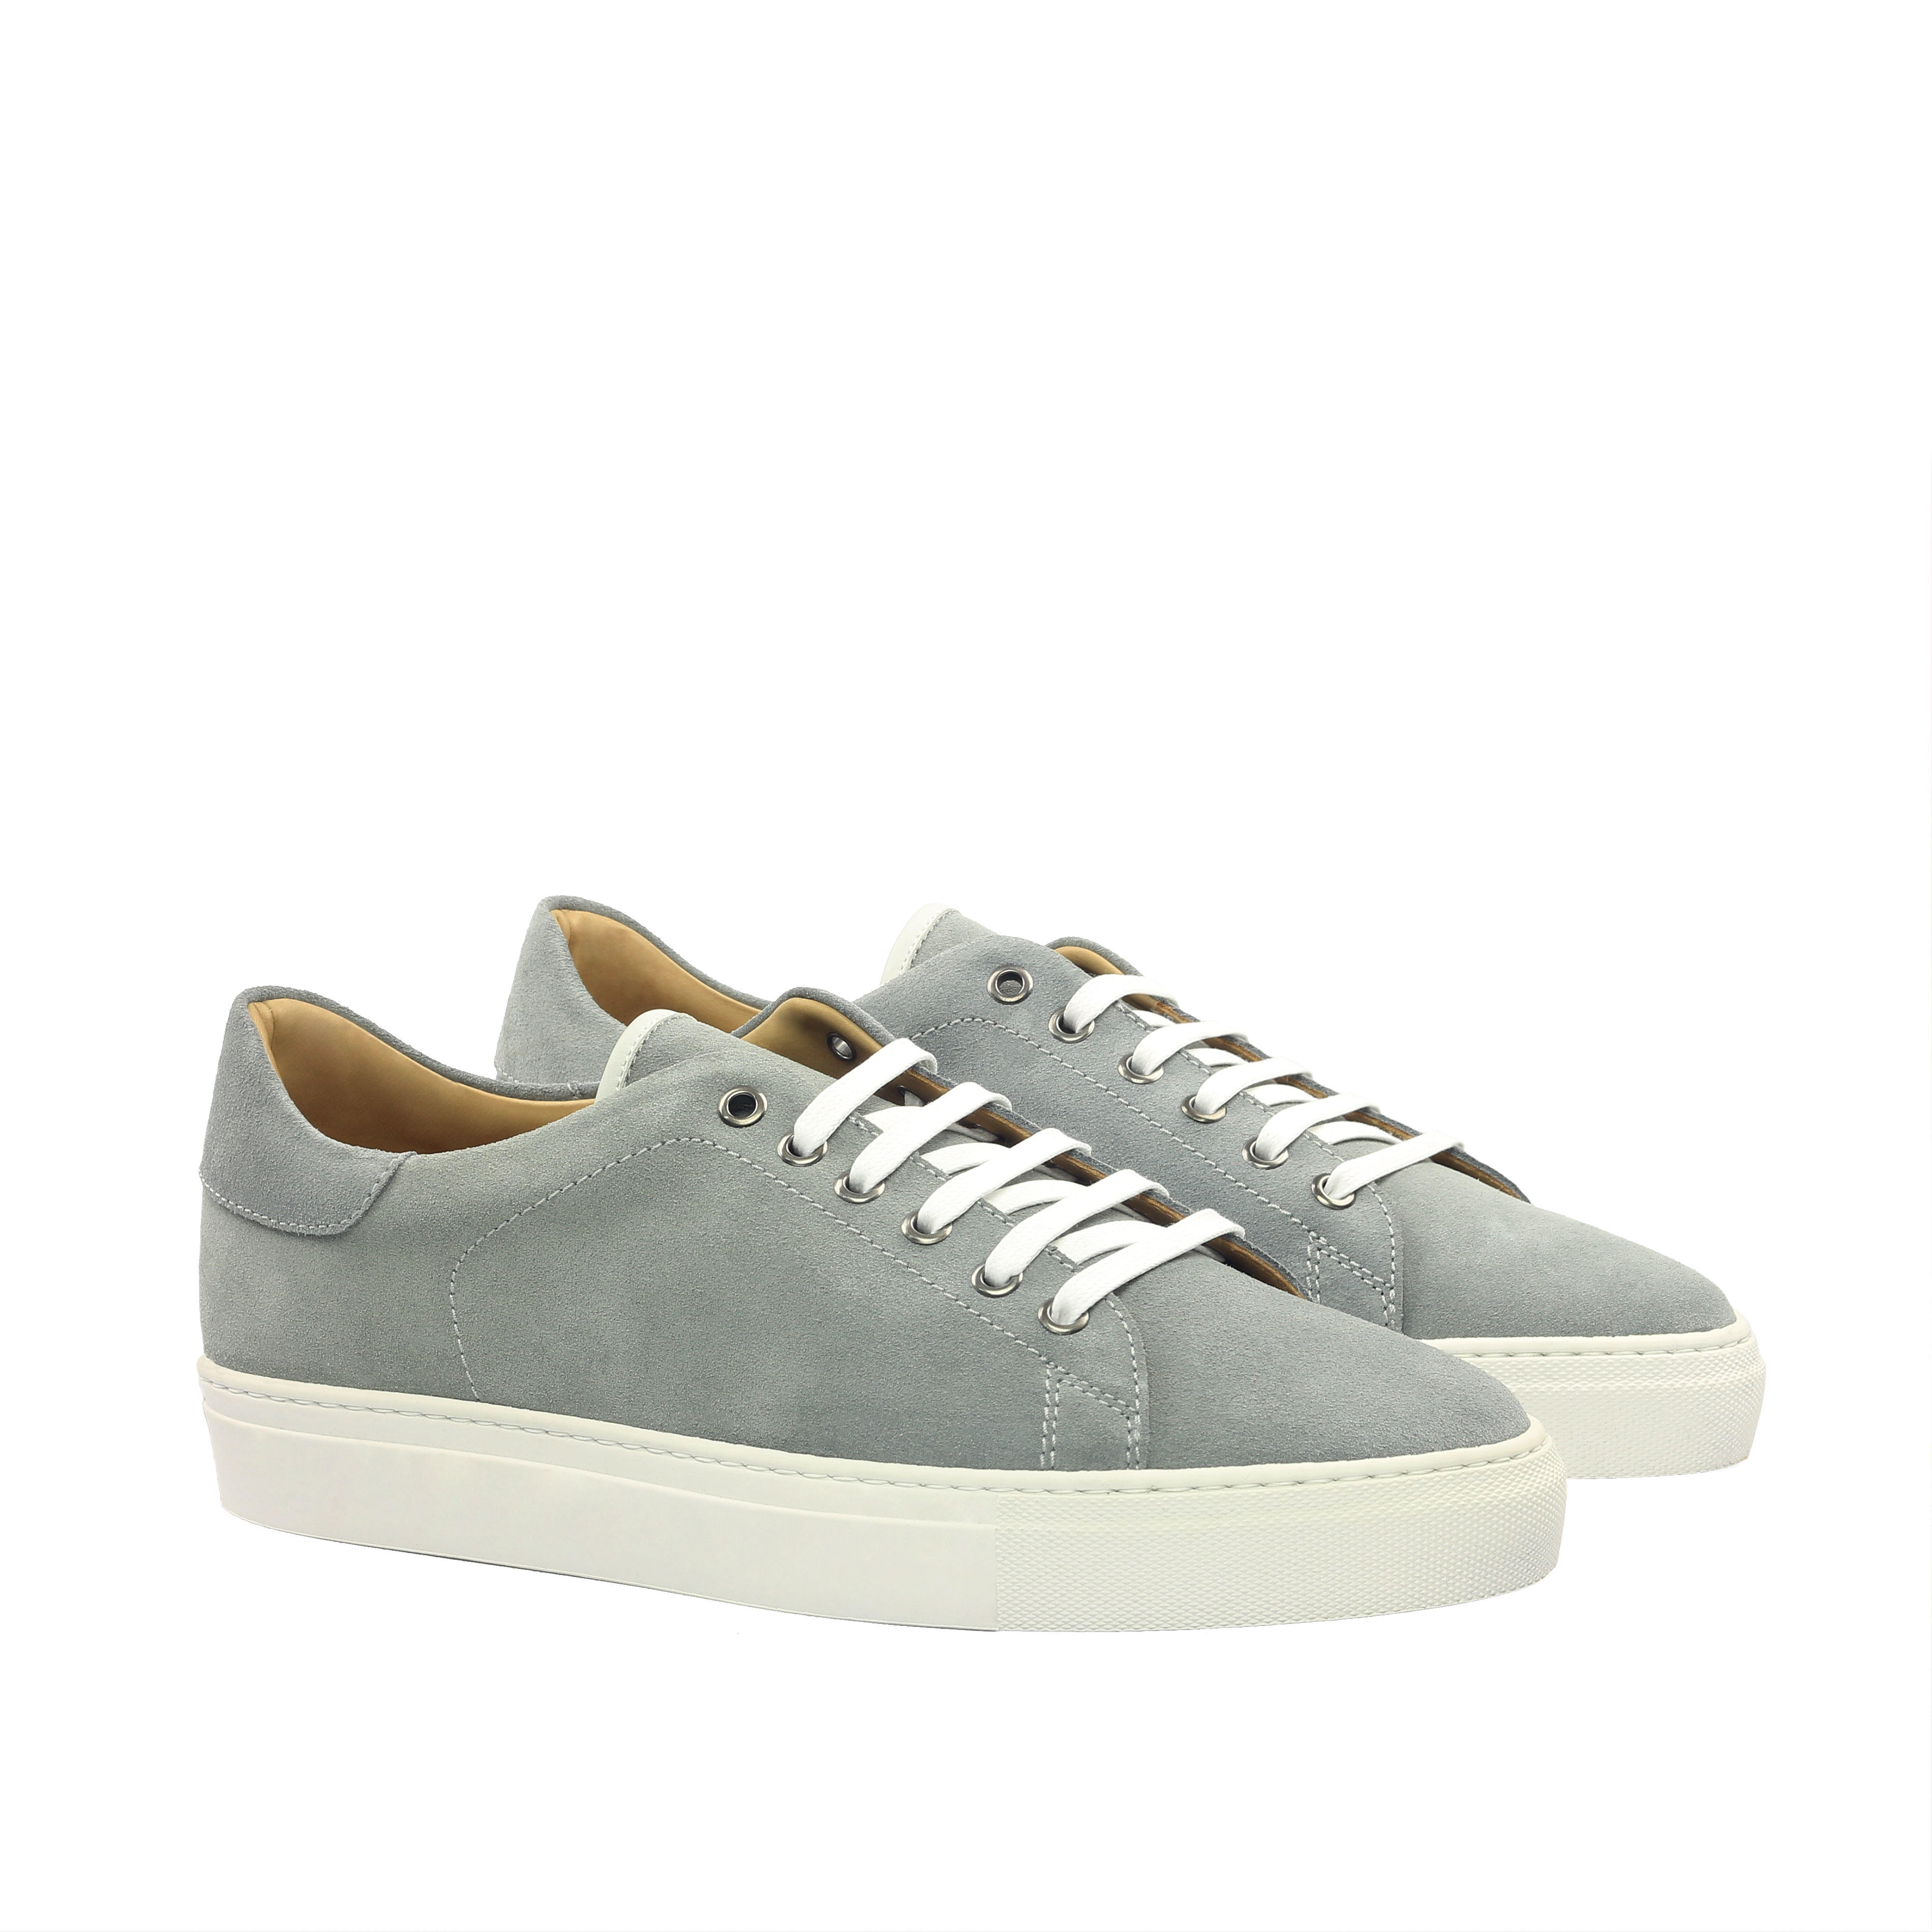 MANOR OF LONDON 'The Perry' Grey Suede & White Calf Tennis Trainer Luxury Custom Initials Monogrammed Front Side View